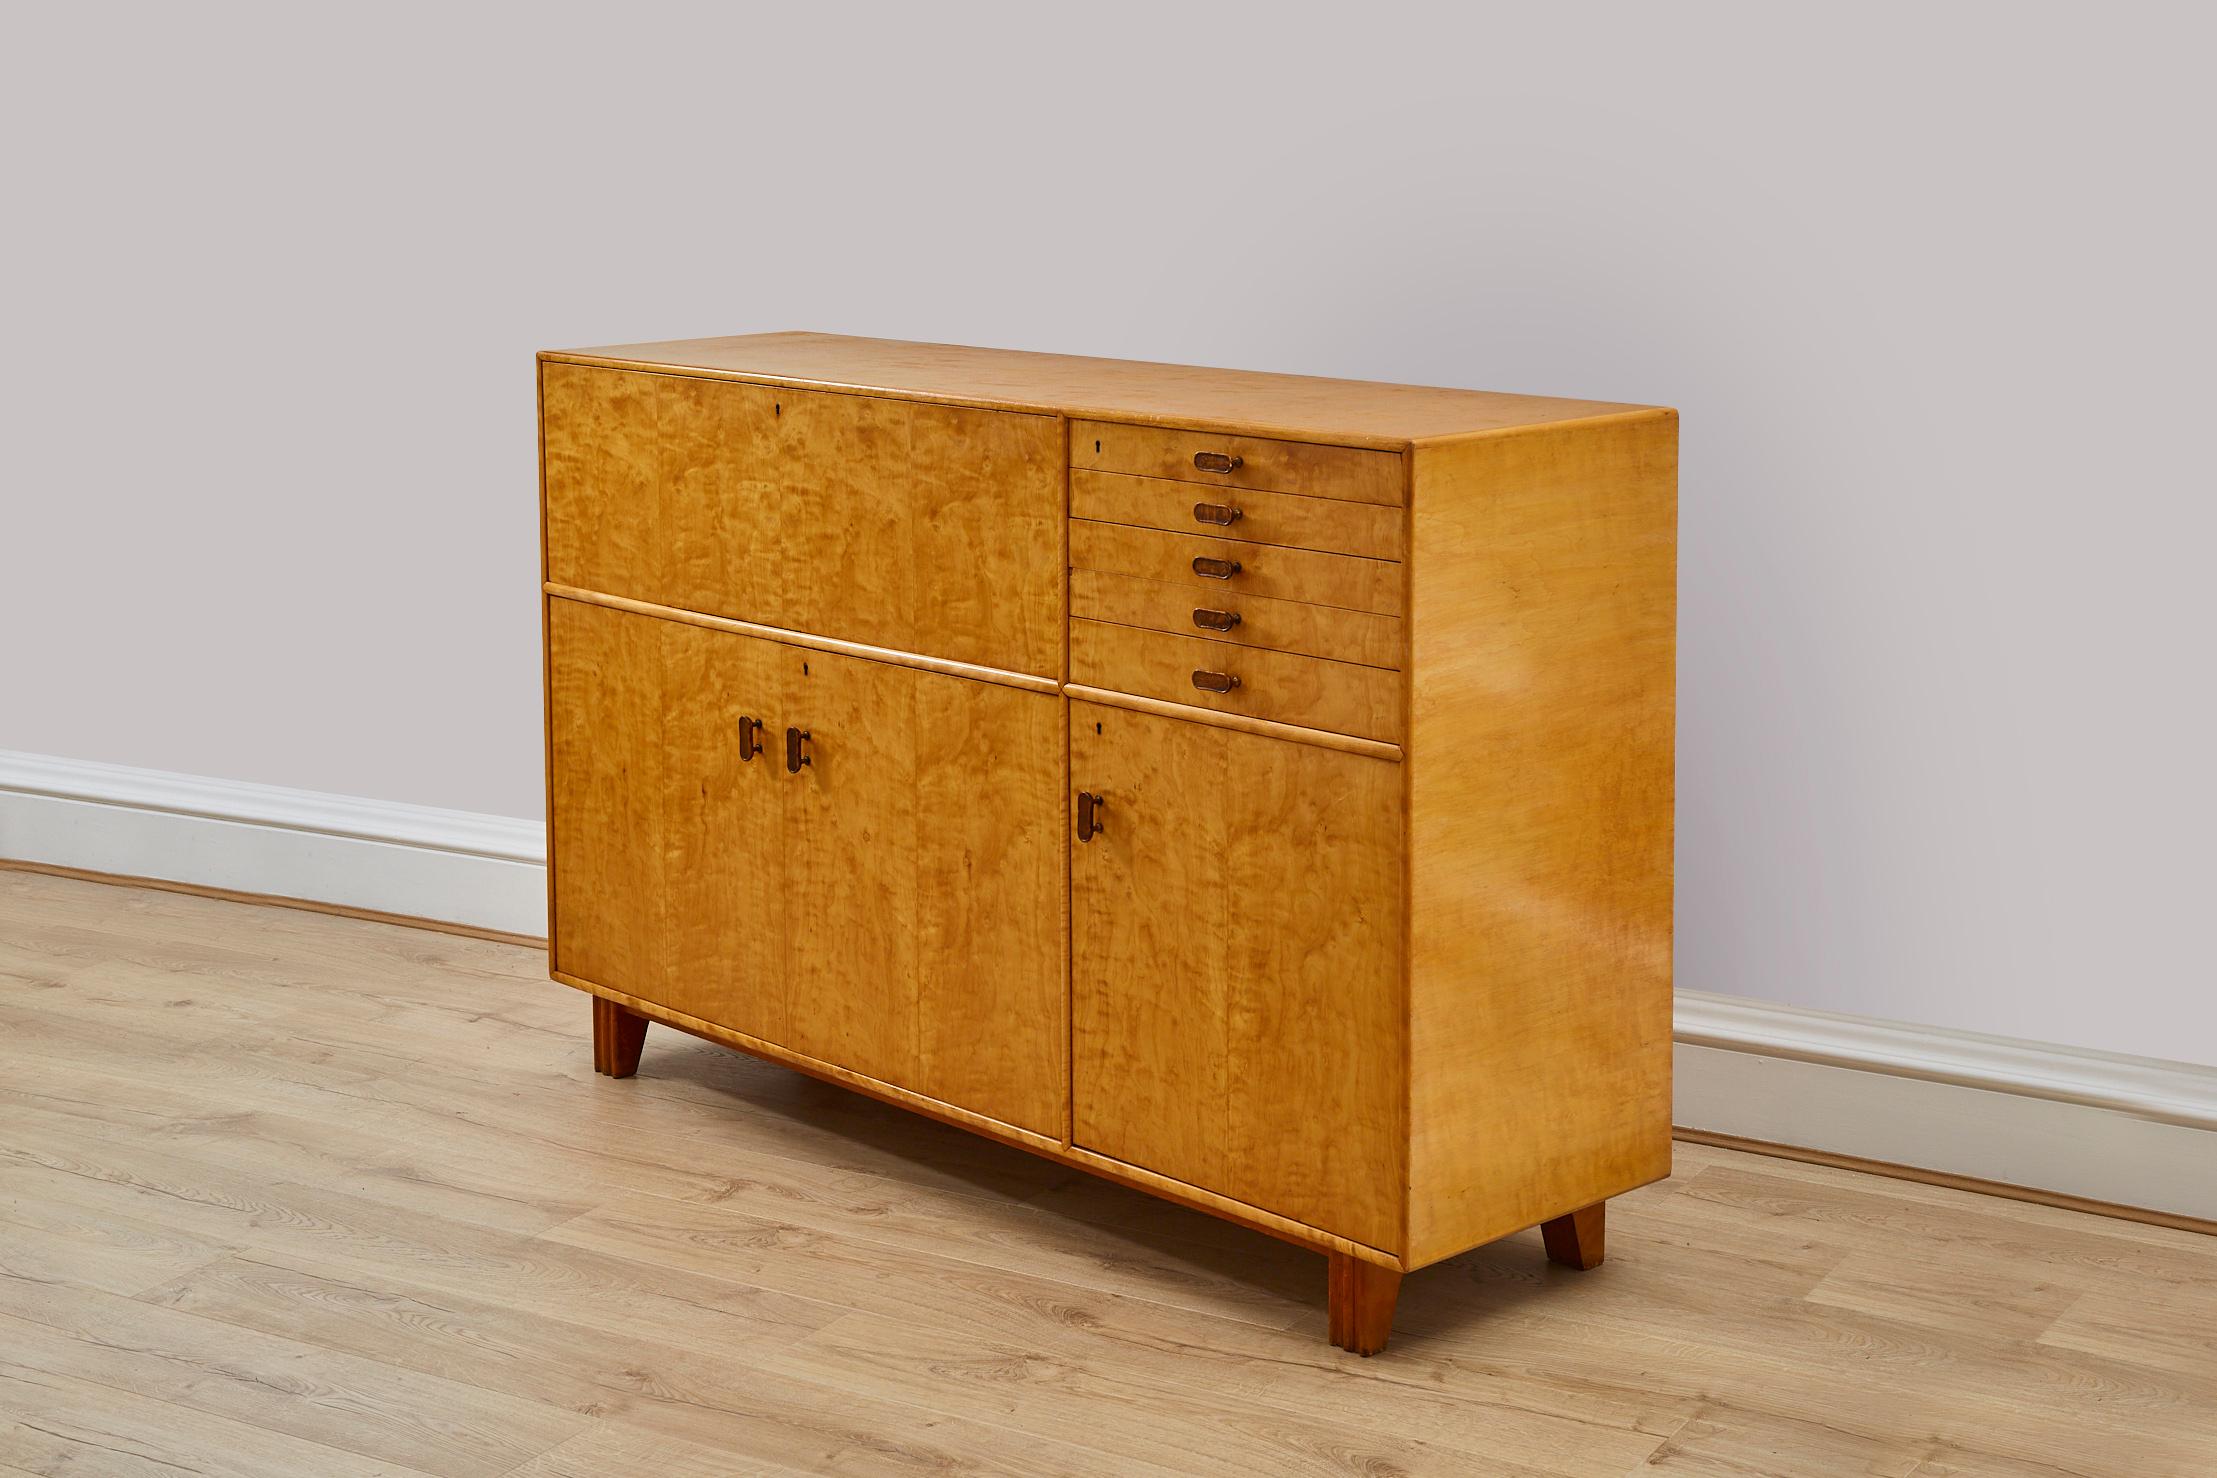 Art Deco birch wood cabinet / sideboard, designed by Axel Larsson for A.B. Svenska Möbelfabrikerna Bodafors. 

This practical and stylish piece will fit everything you need. The Swedish design is slick and sophisticated with the makers mark inside